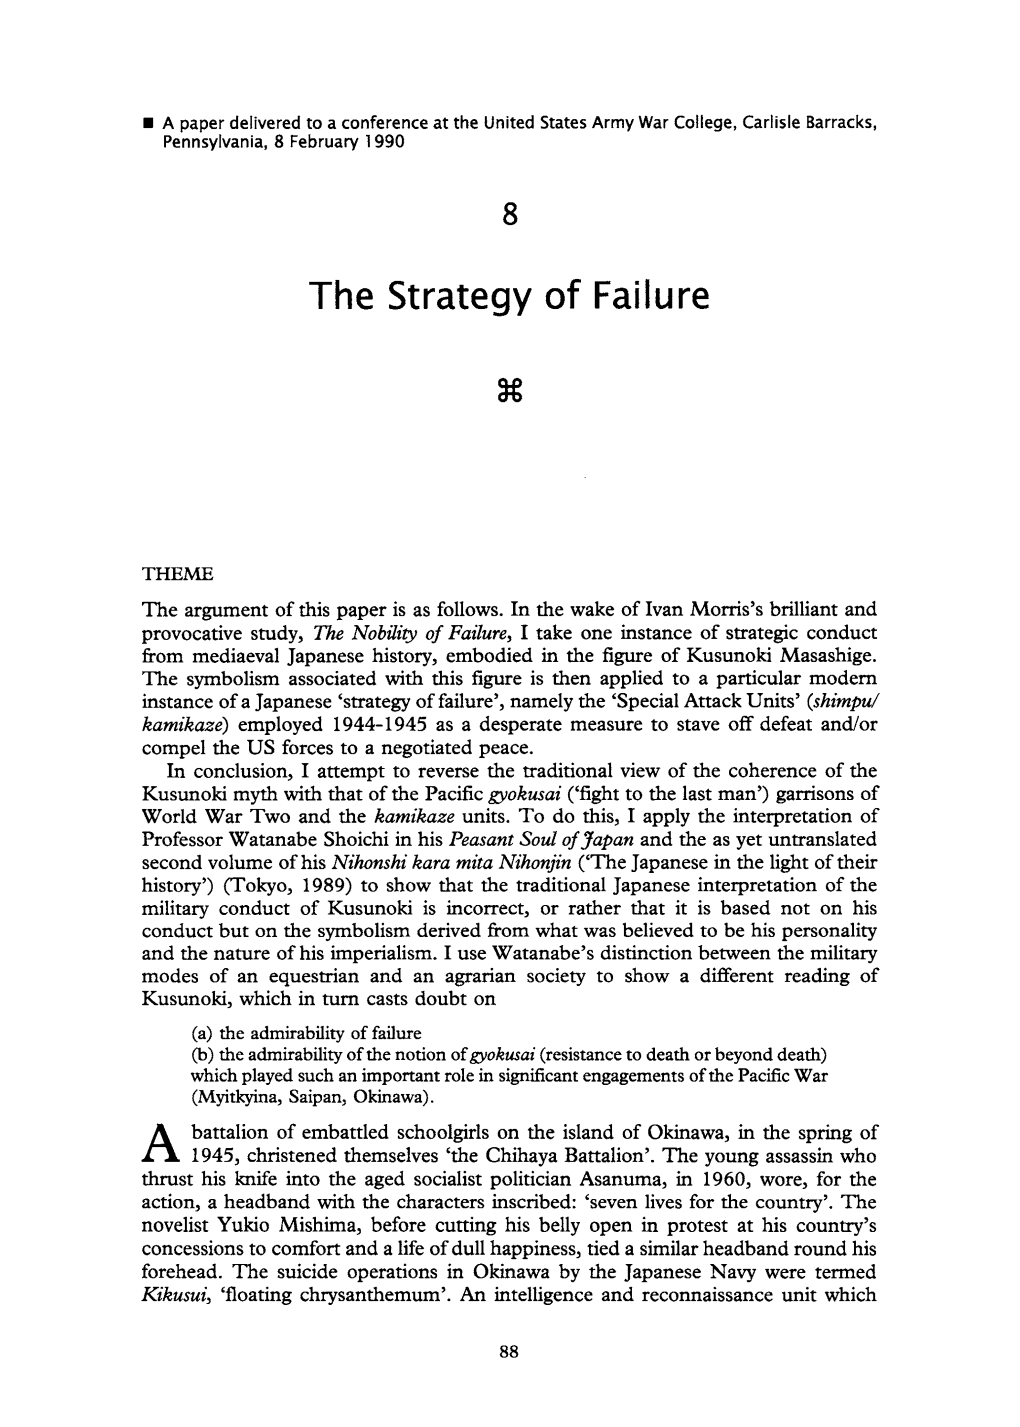 The Strategy of Failure